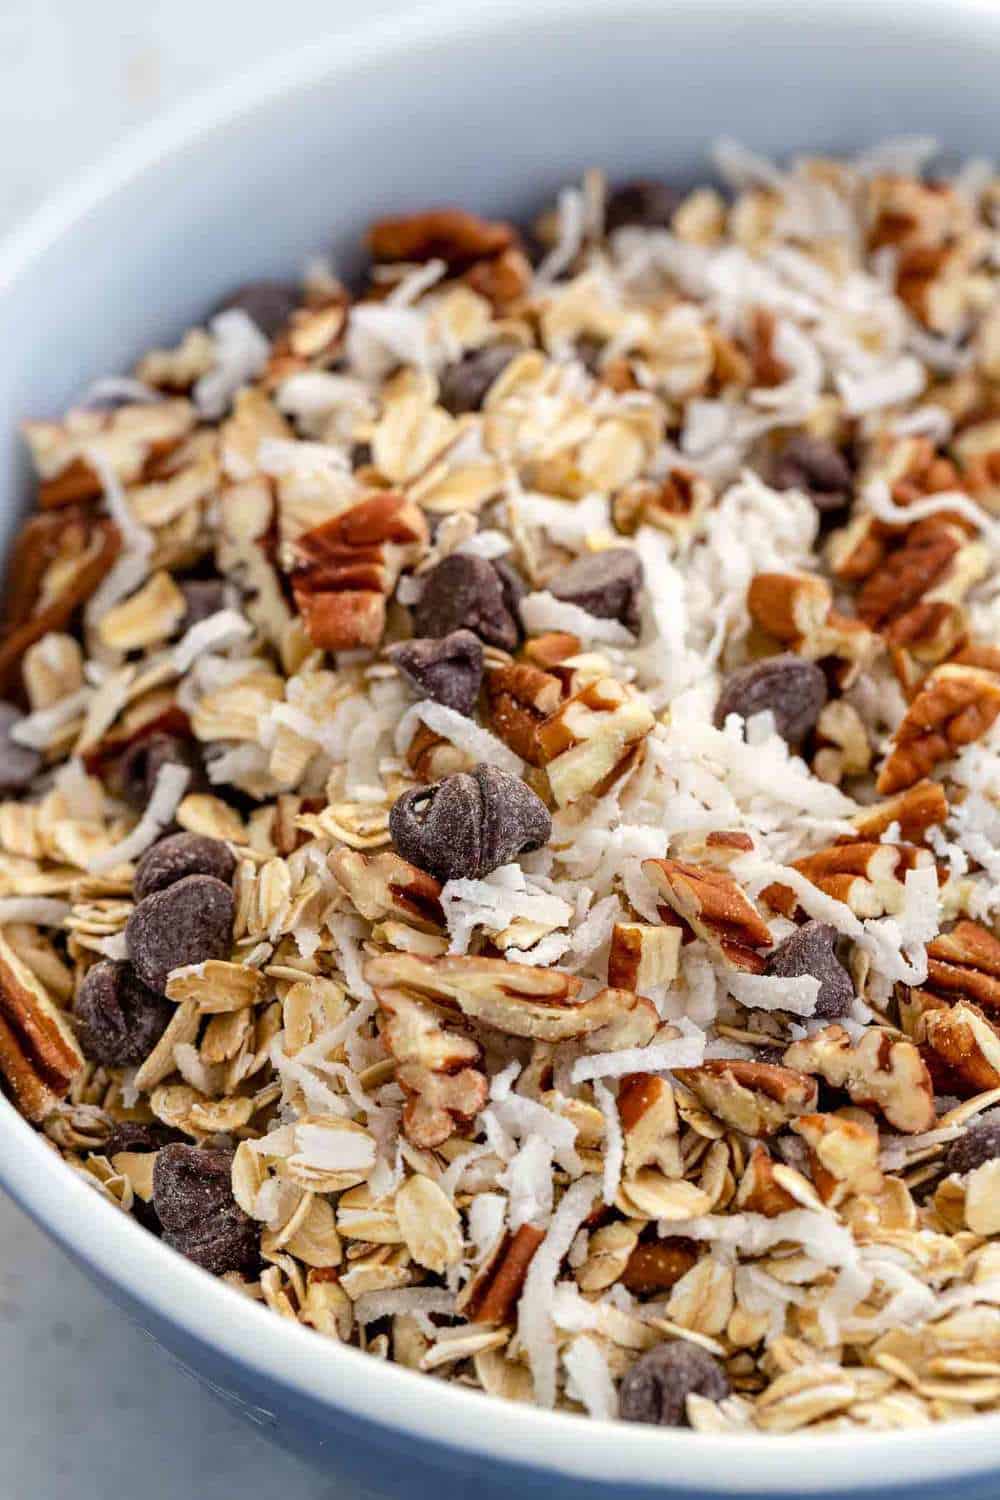 dried ingredients and chocolate chips in a mixing bowl